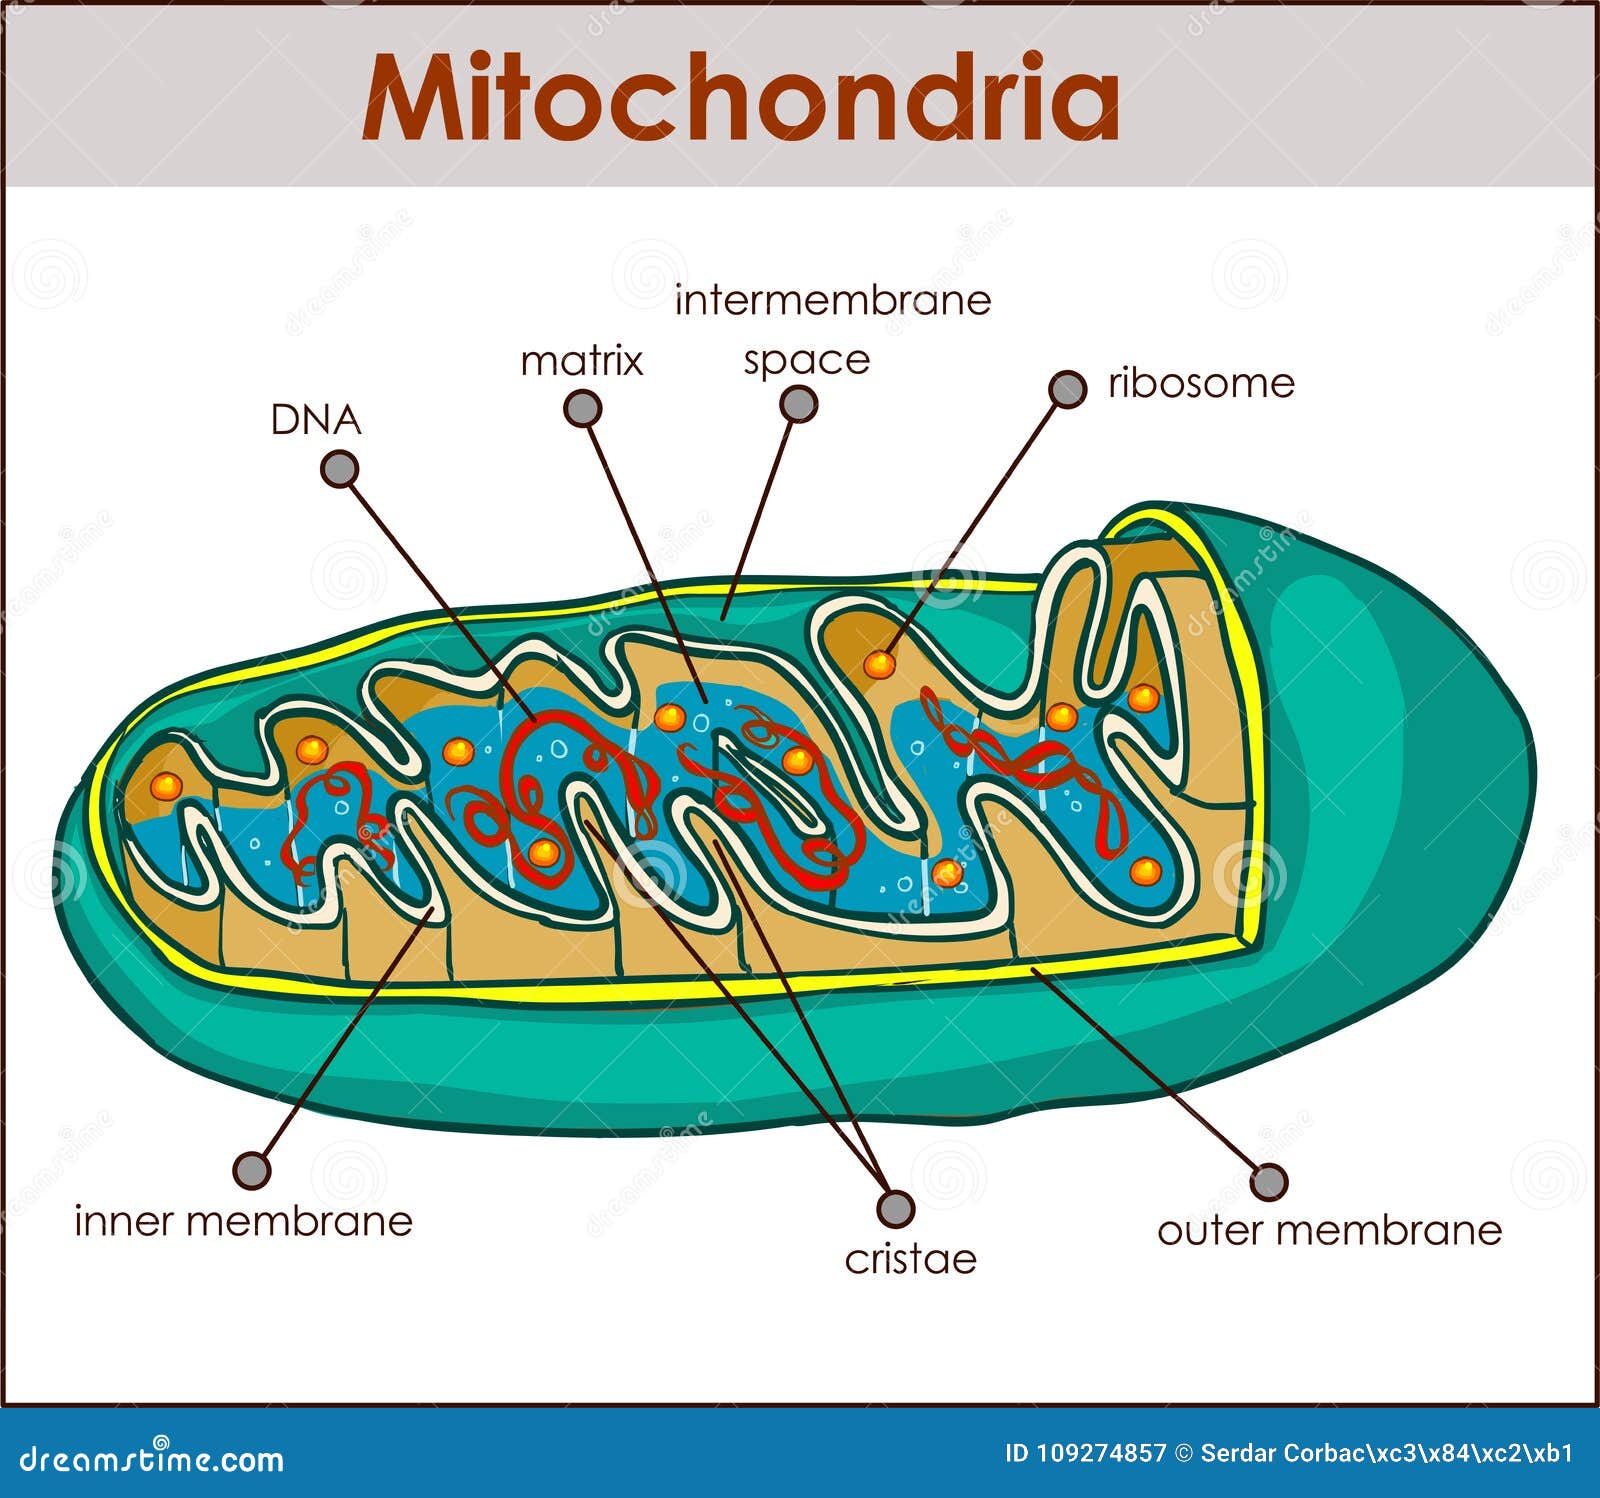  illustrator of cross section of mitochondria